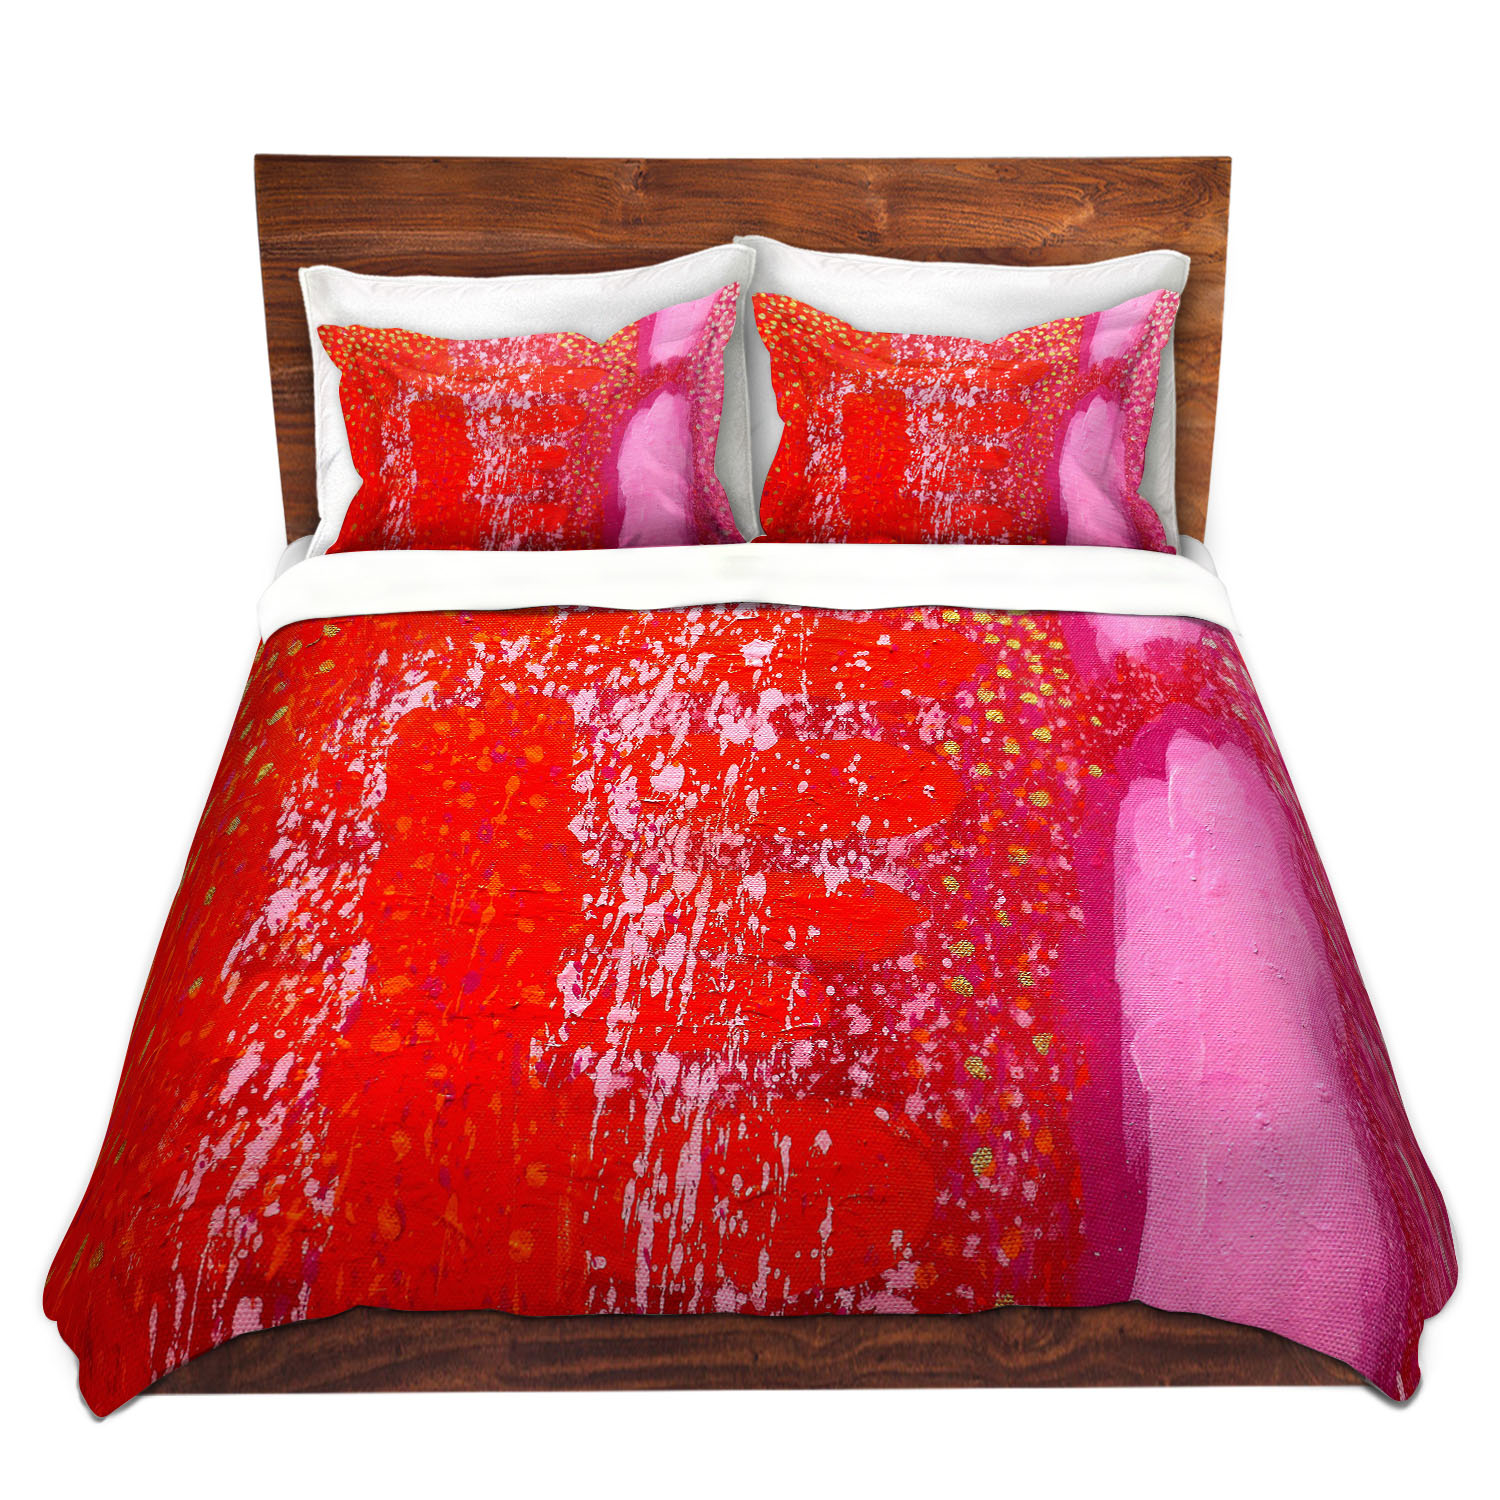 Dianoche Microfiber Duvet Covers By John Nolan - Transcendental Abstract